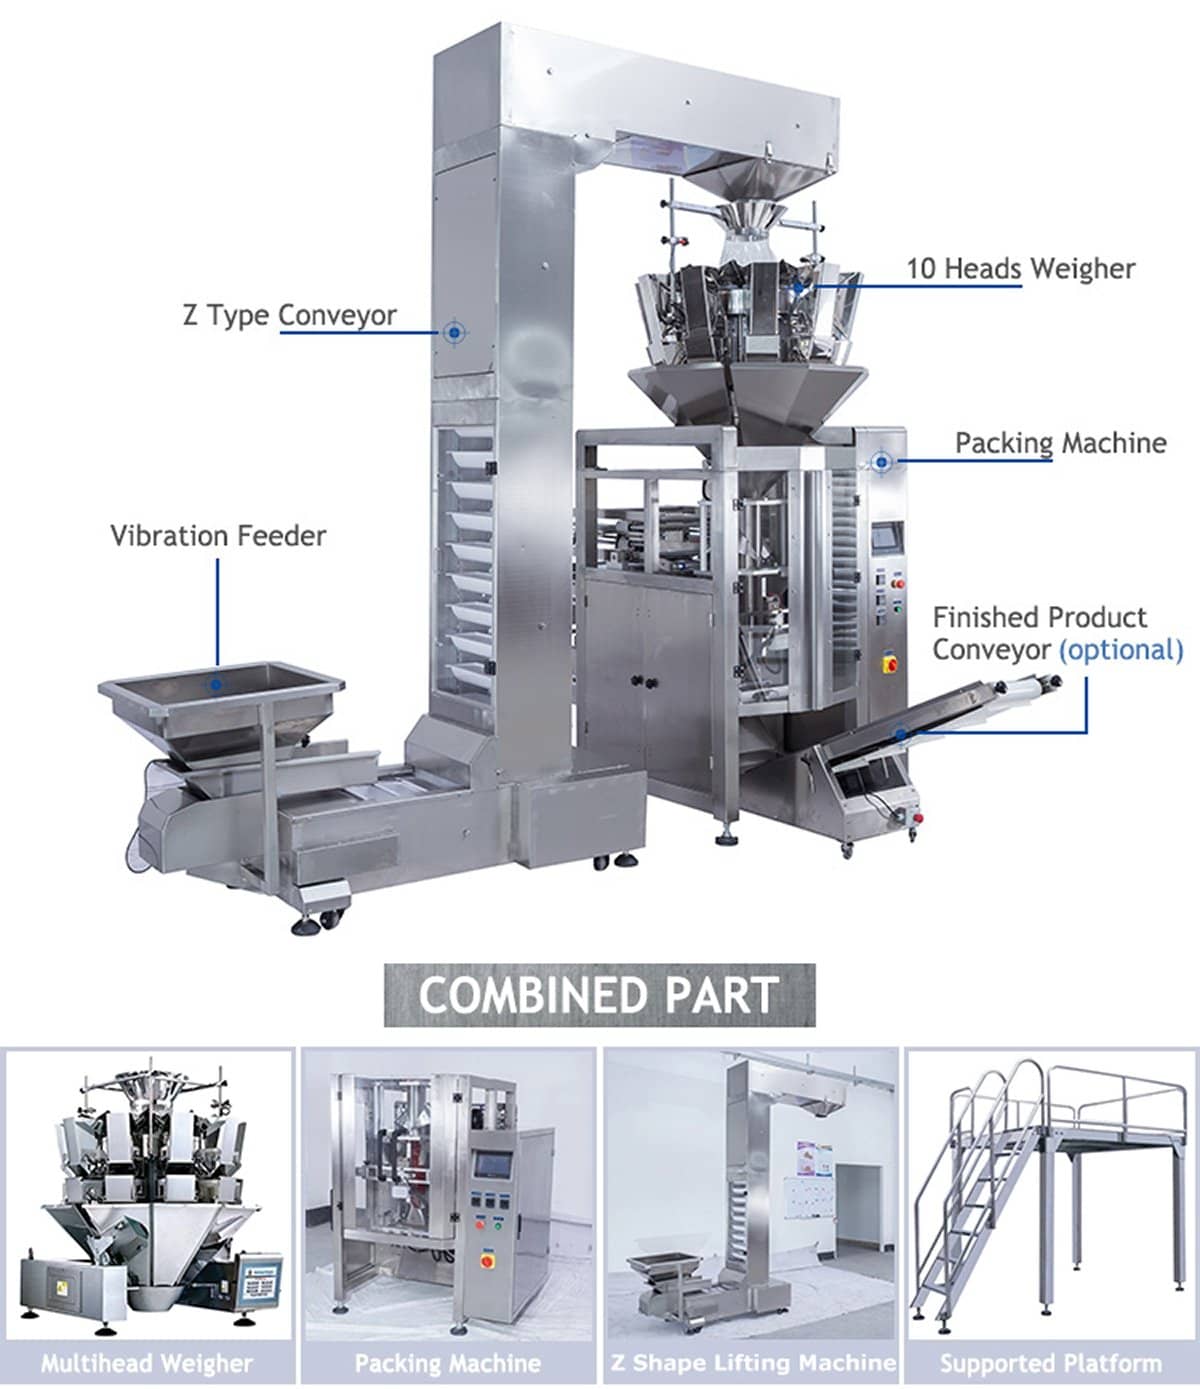 Automatic Weighting and Packing Machine Description